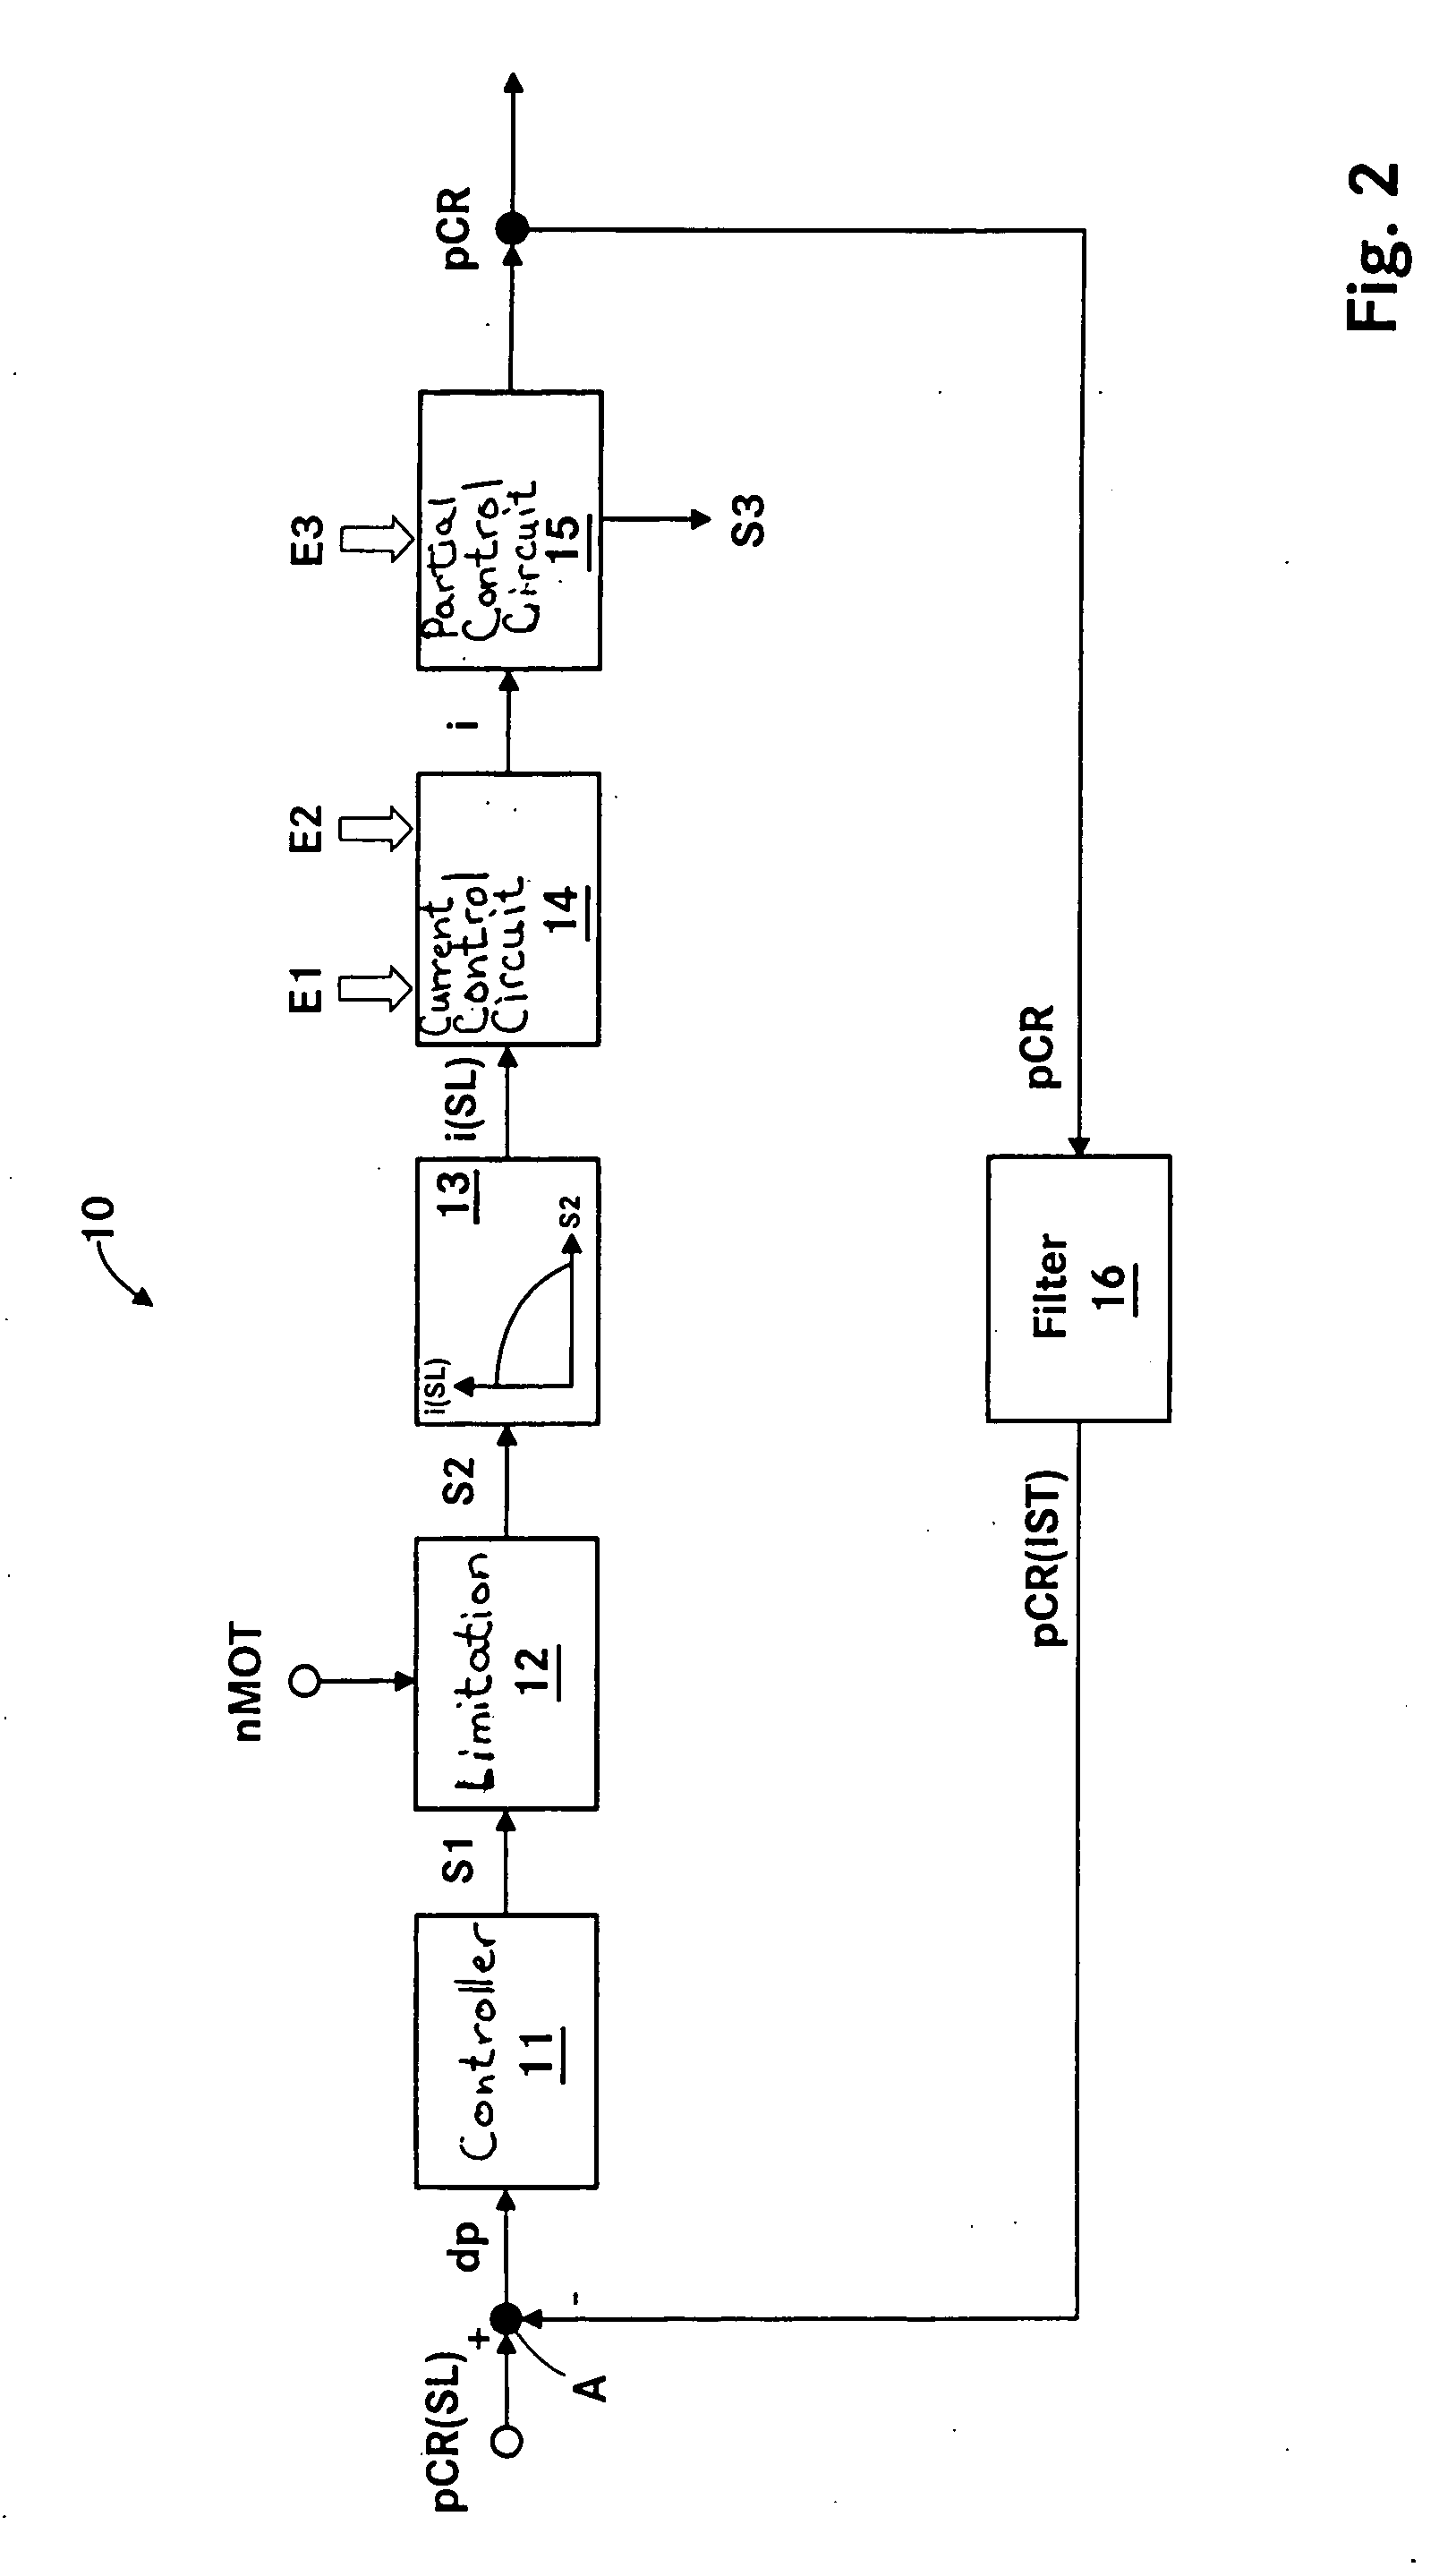 Method and apparatus for controlling the pressure in a common rail system